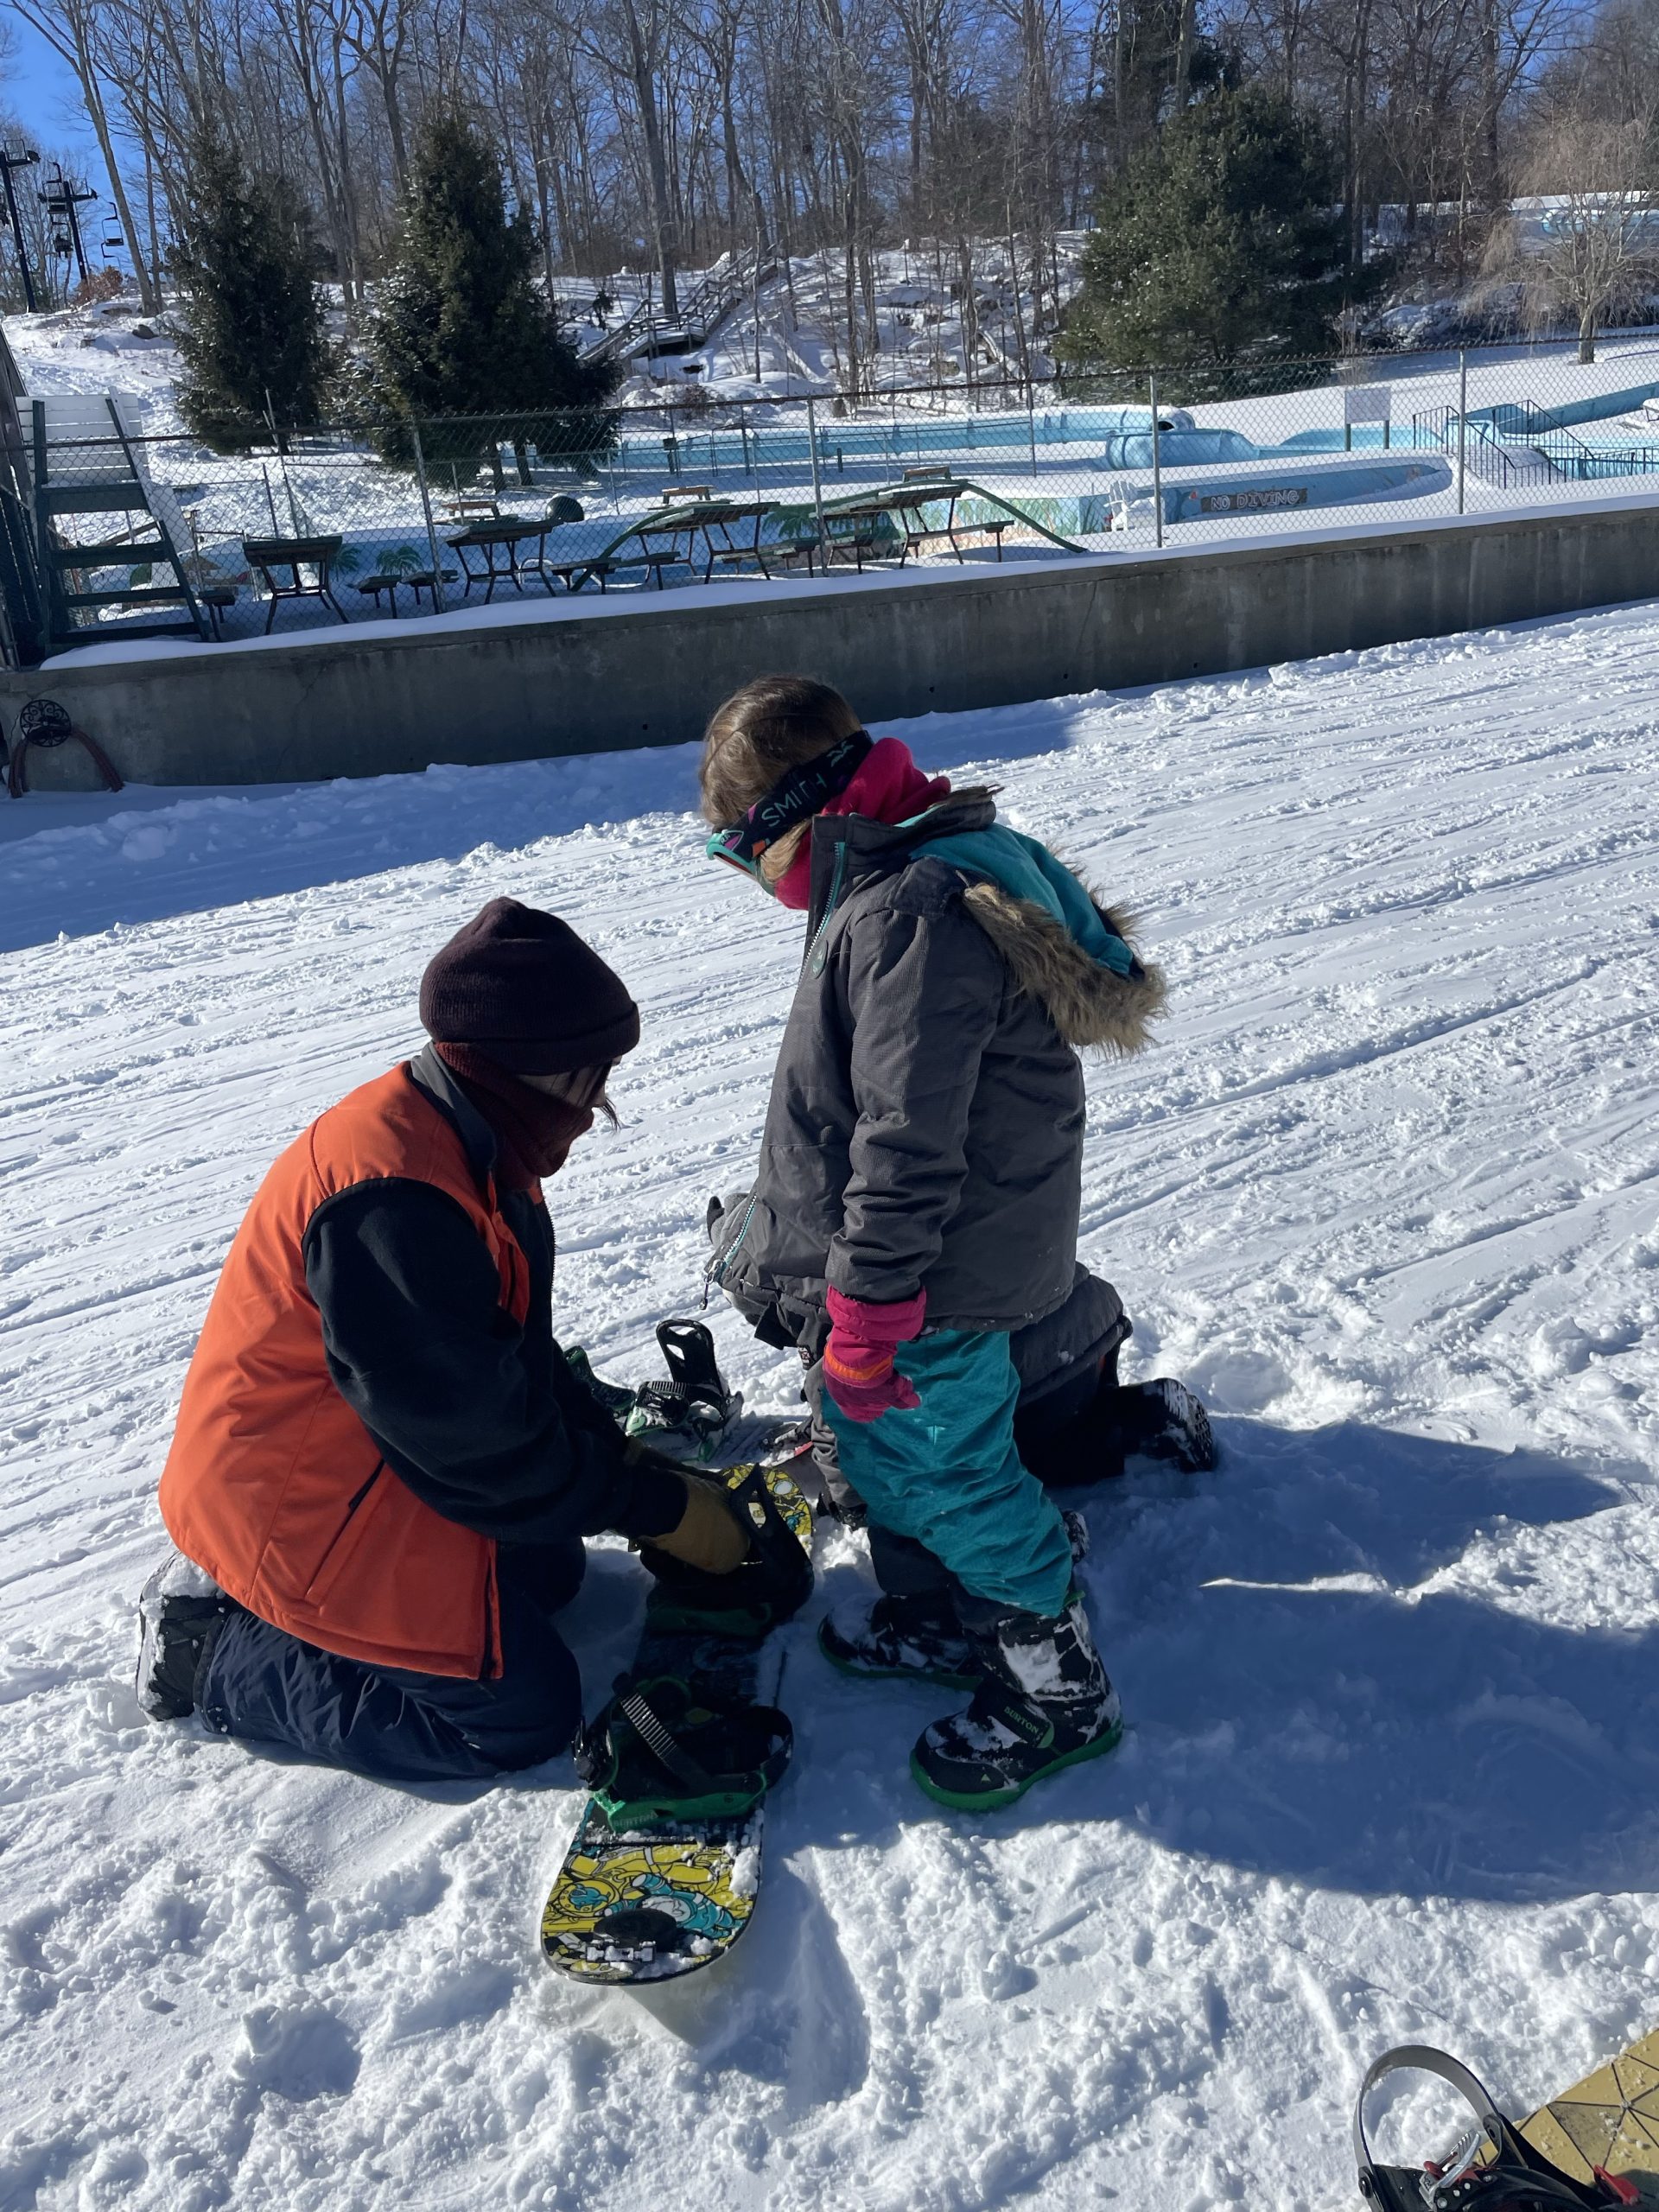 Yagoo Valley snowboarding lesson with kids